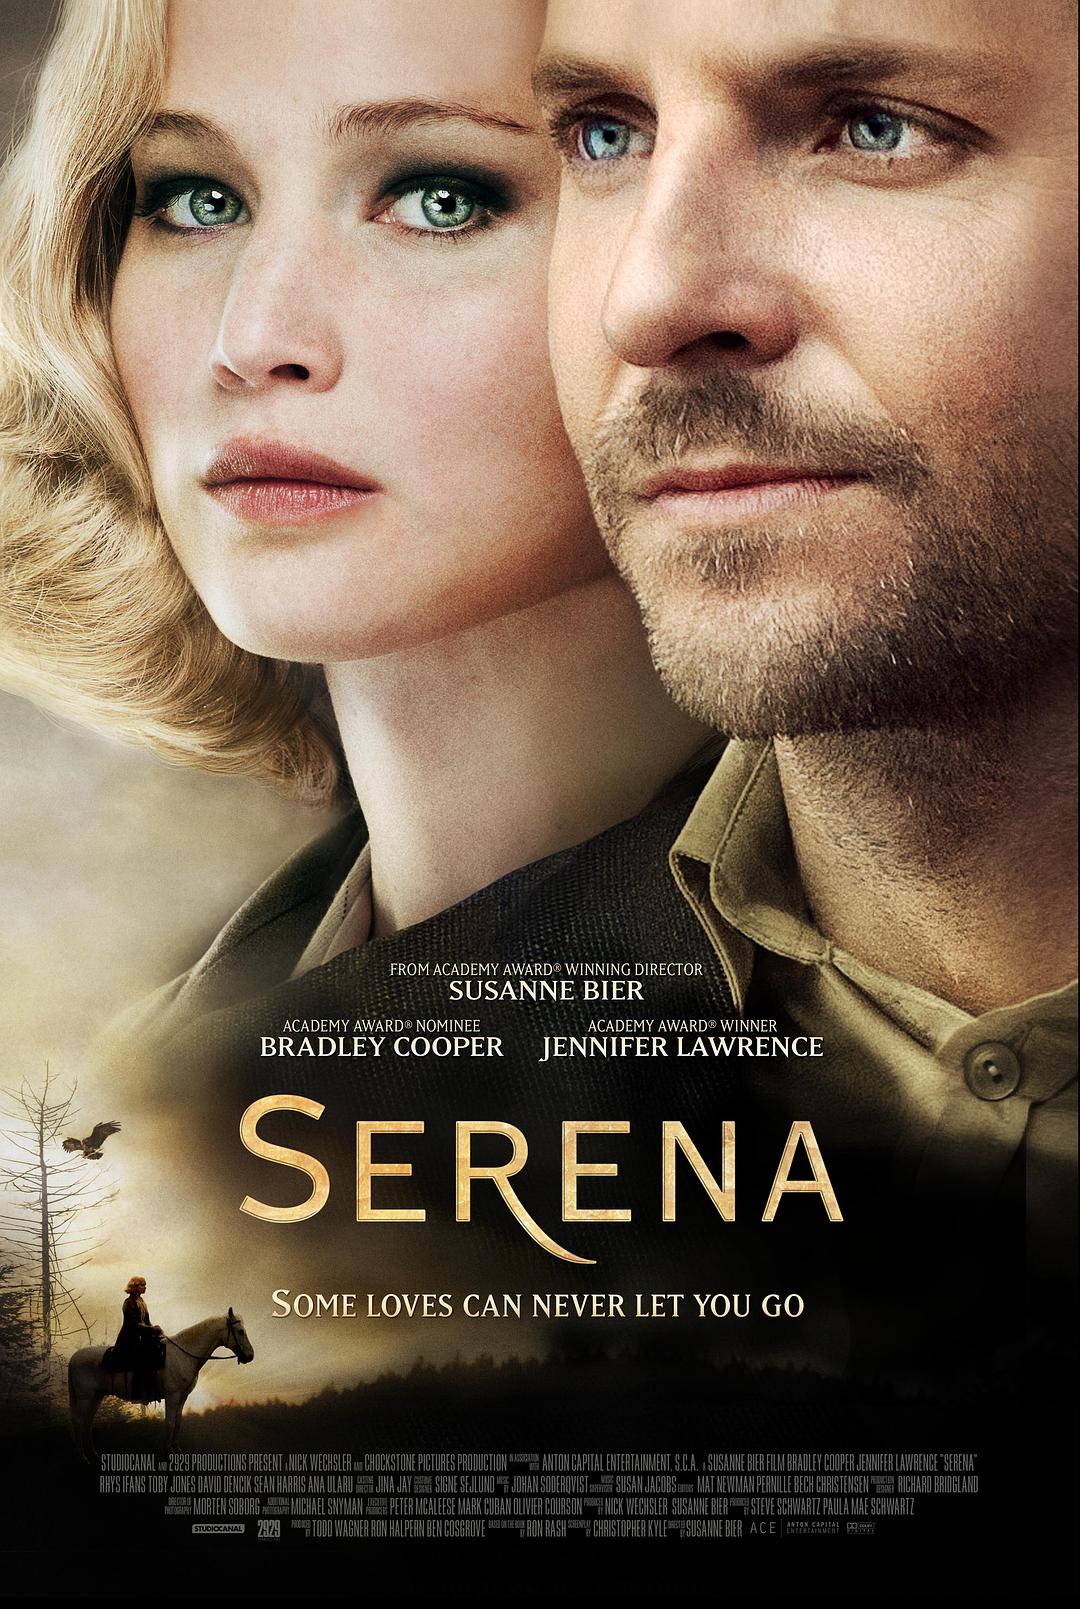  Serena.2014.LIMITED.1080p.BluRay.X264-AMIABLE 7.65GB-1.png